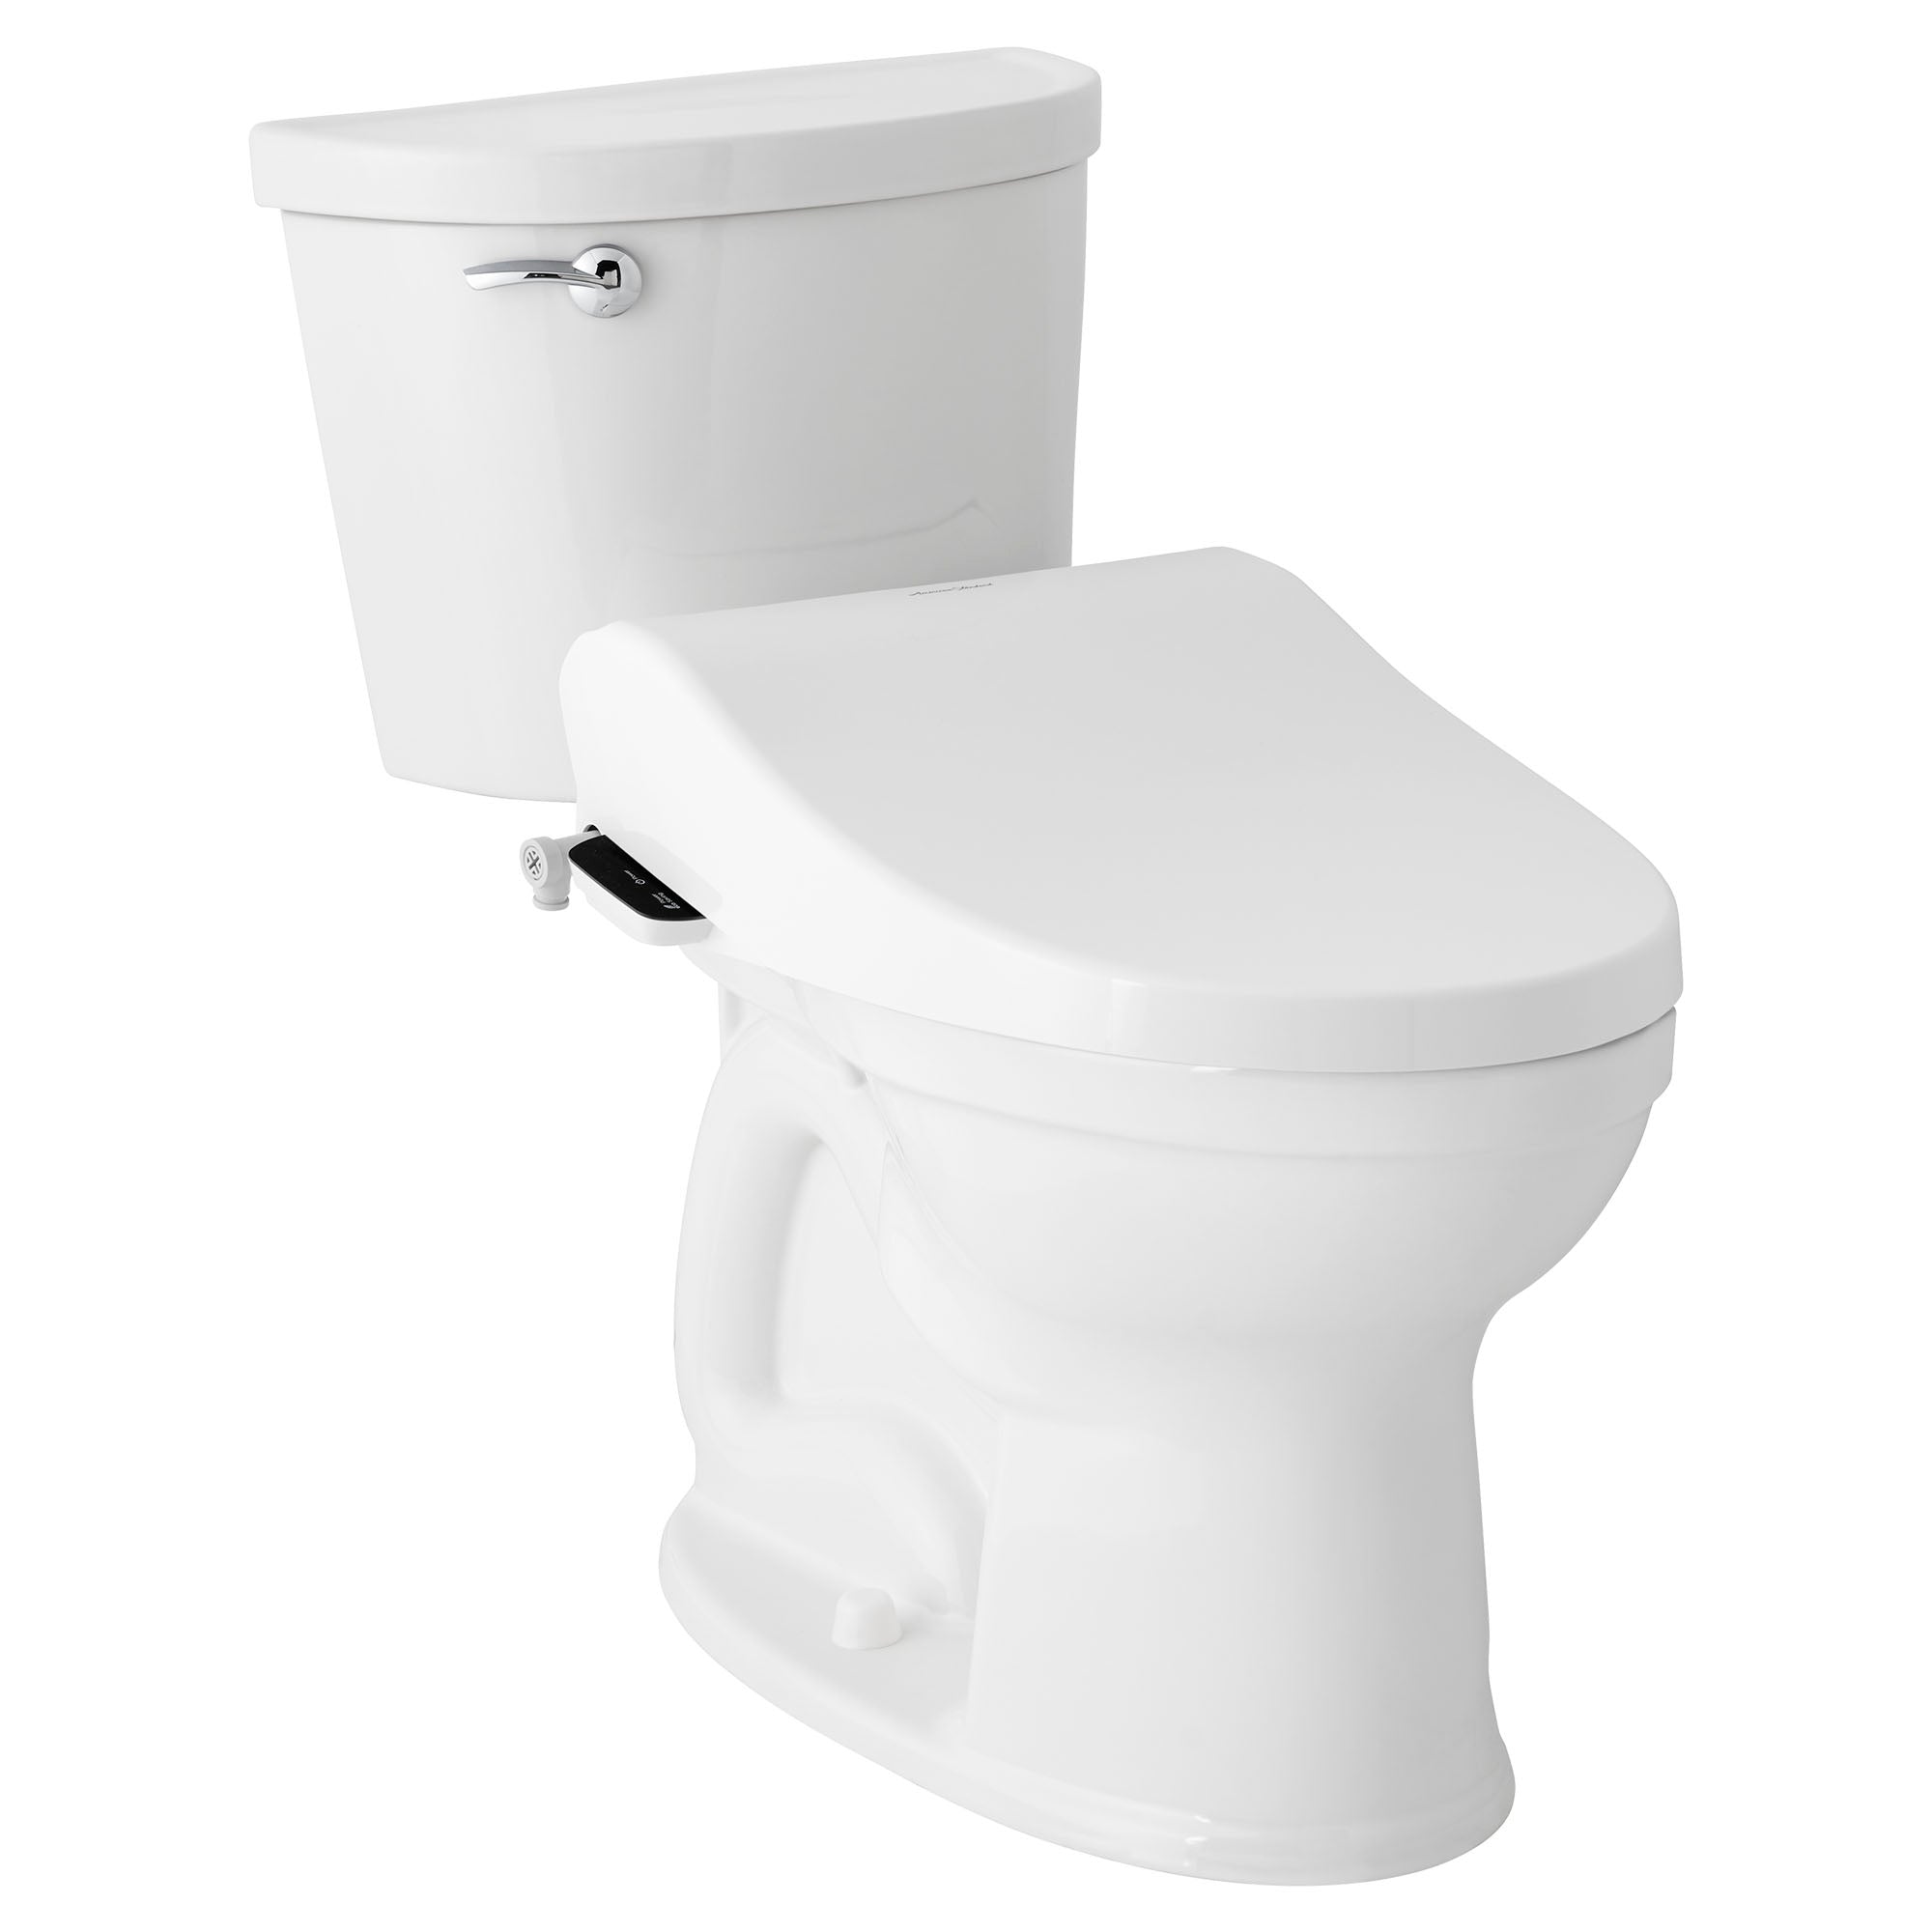 American Standard Advanced Clean® 2.5 Electric SpaLet® Bidet Seat With Remote Operation